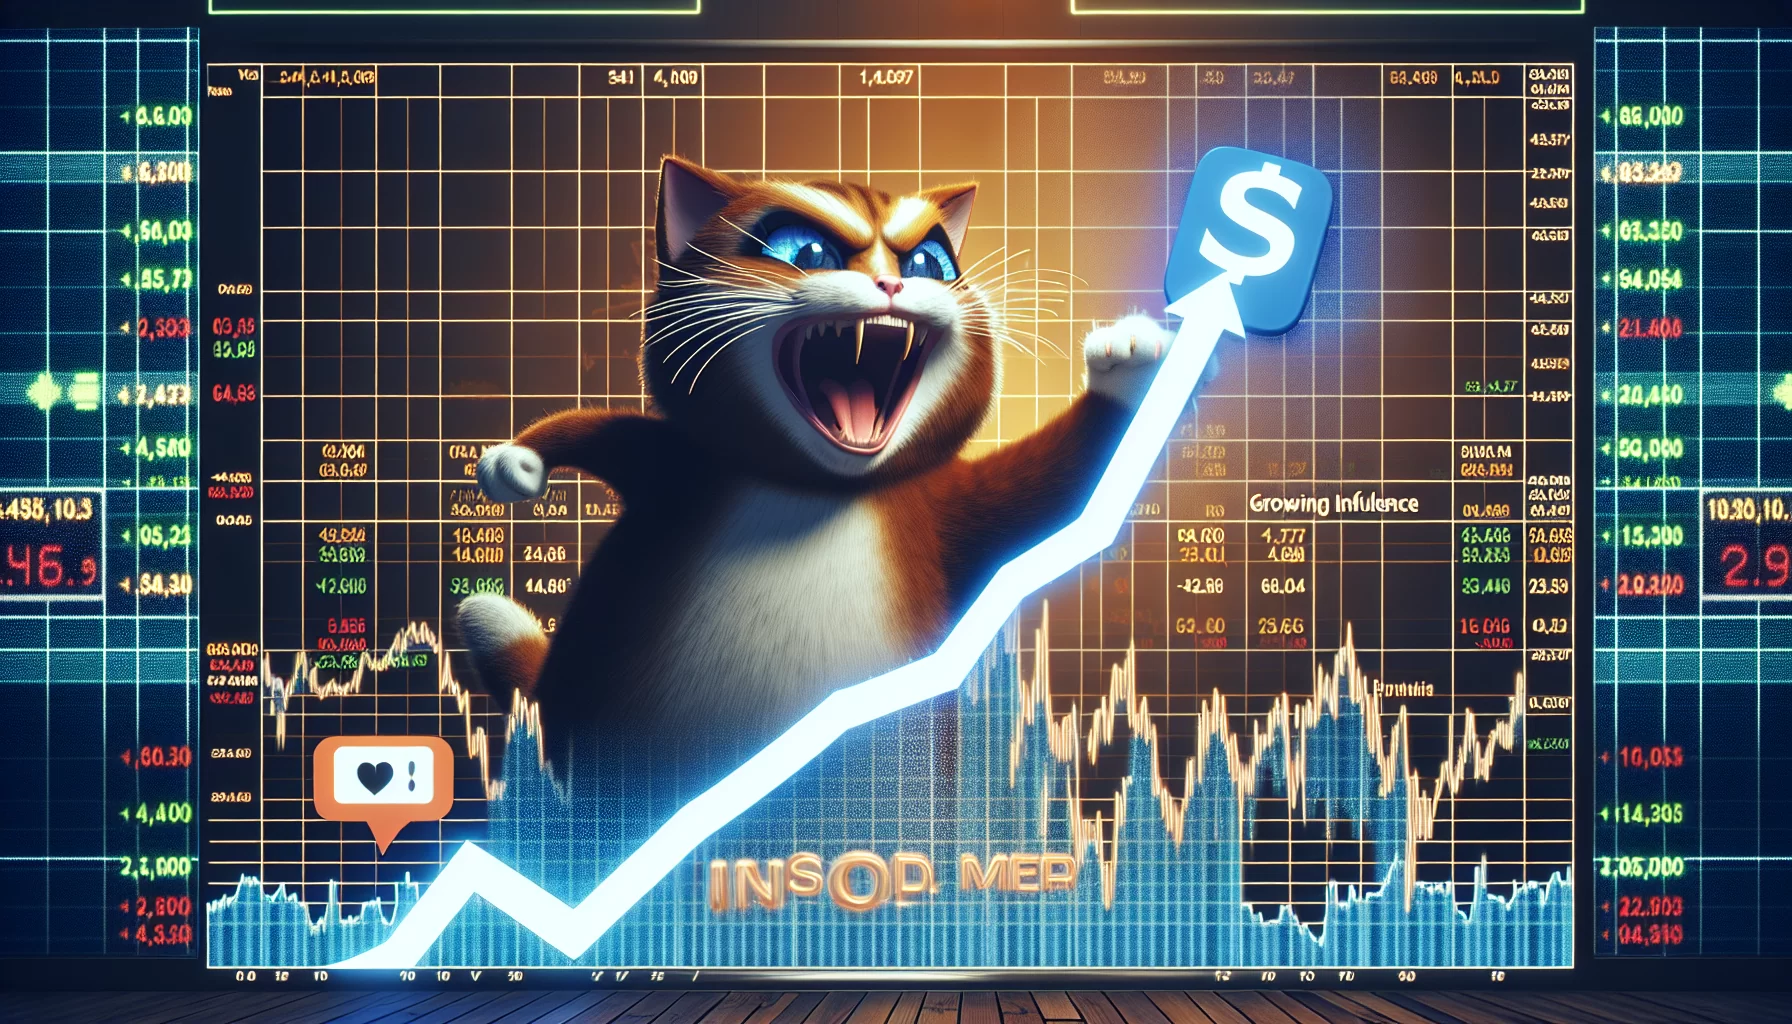 Roaring Kitty triggers Chewy stock surge: the growing influence of social media on financial markets